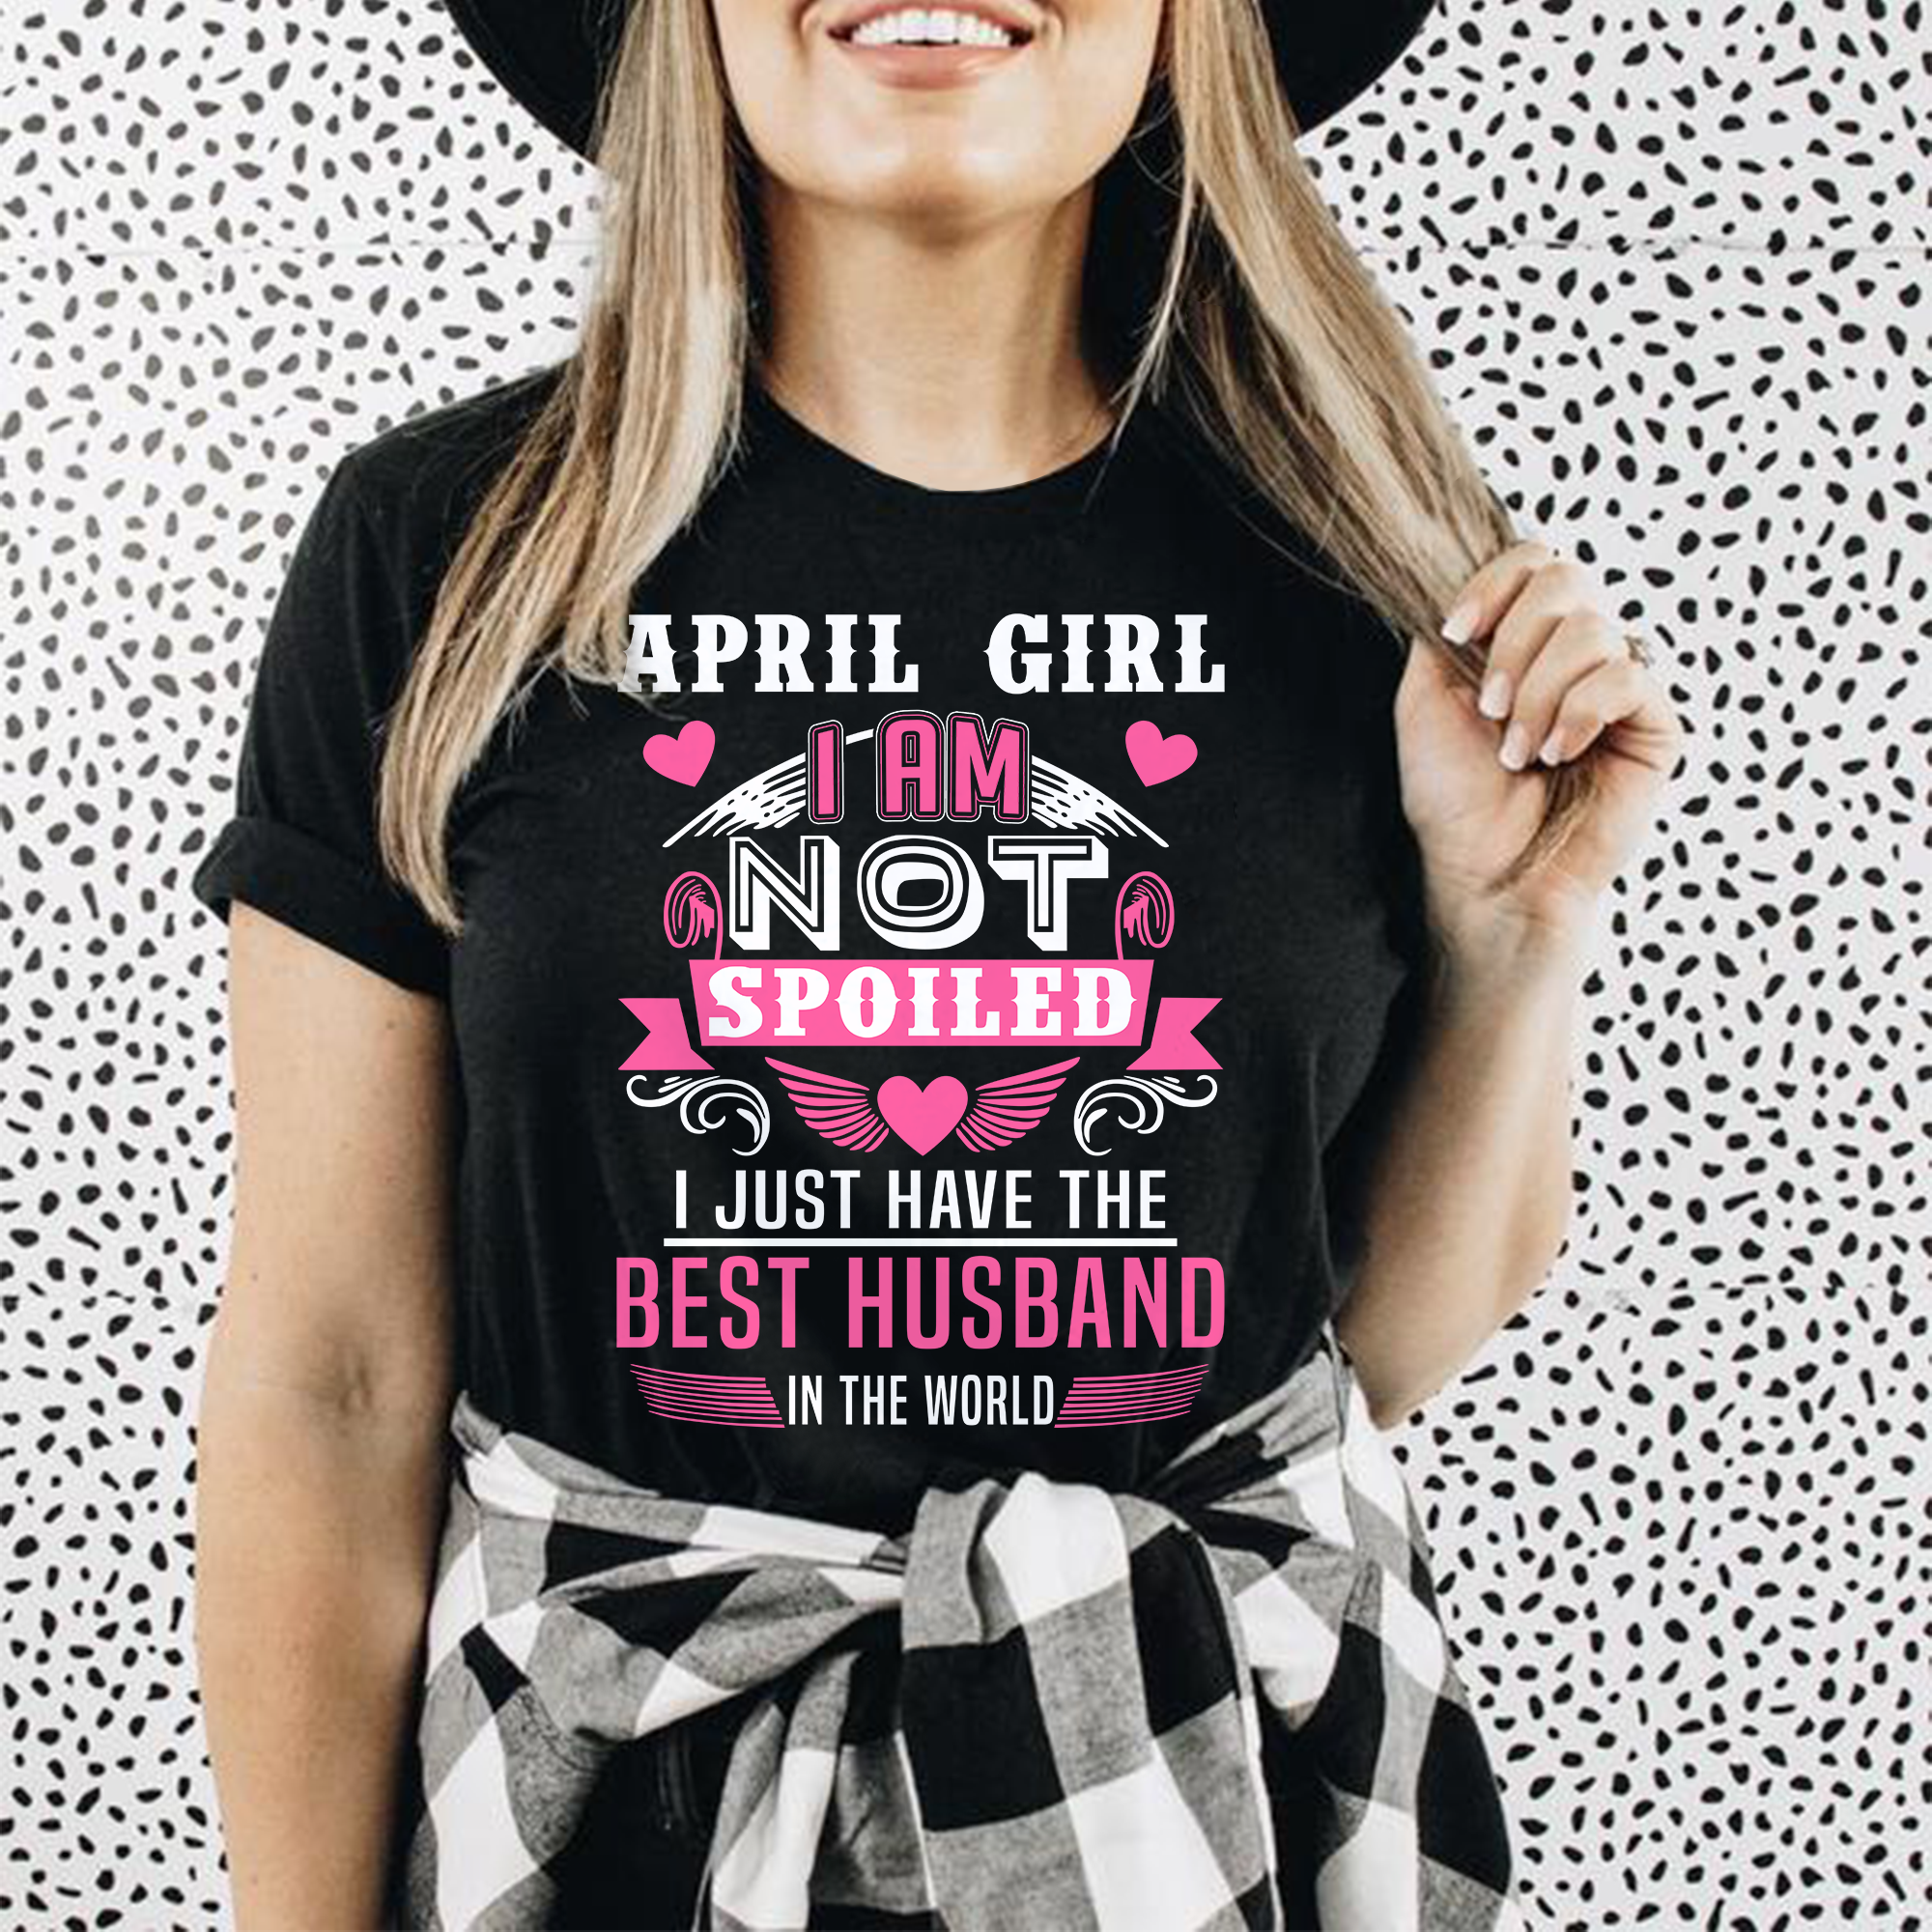 April Girl – I Just Have The Best Husband In The World T-shirt